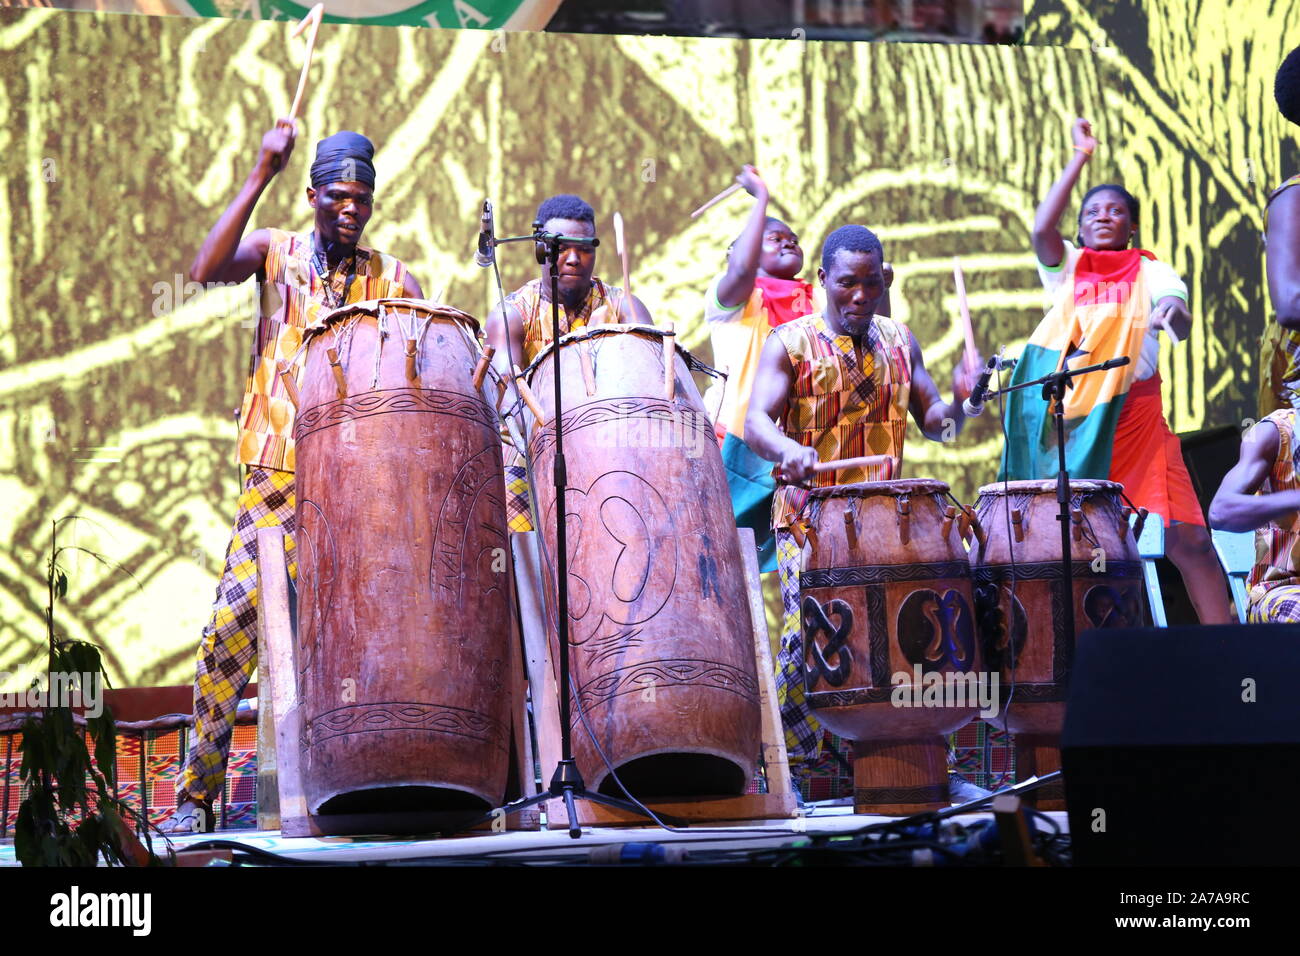 Ghanian Drummers performing at the Festival during the African Drum Festival in Abeokuta, Ogun State Nigeria. Stock Photo